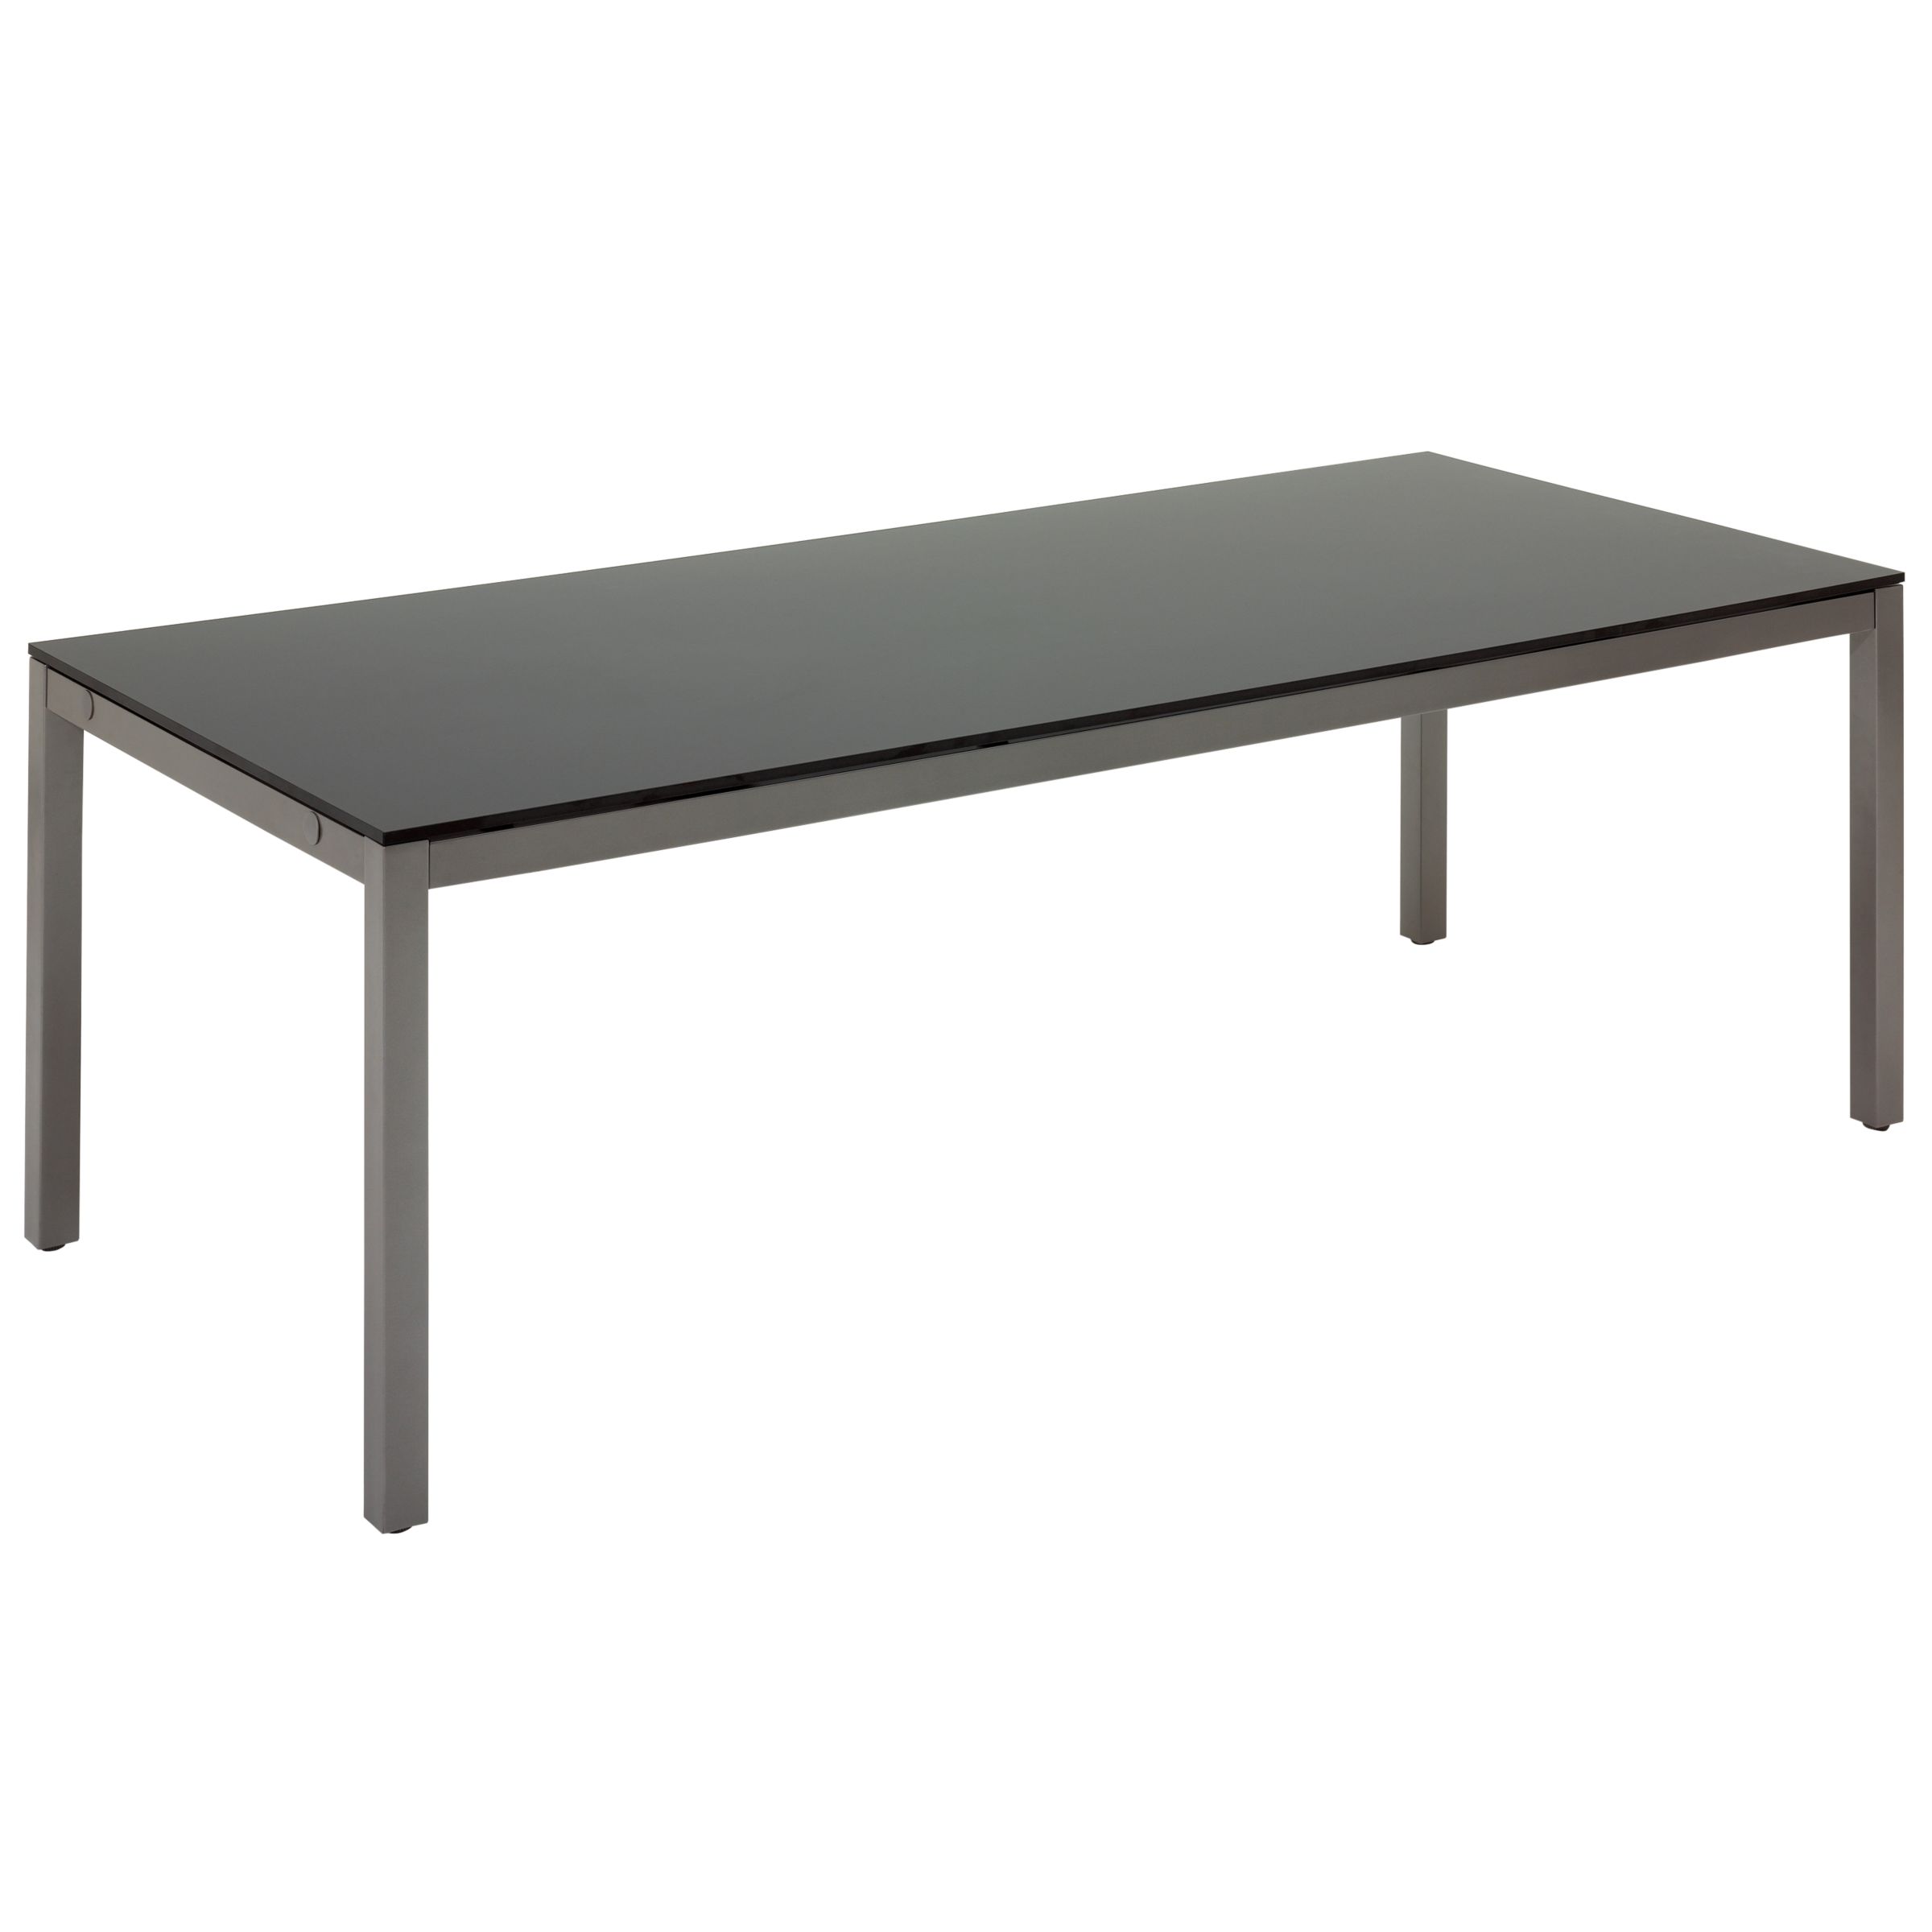 Gloster Azore Rectangular 8 Seater Outdoor Dining Table, Tungsten / HPL, width 220cm